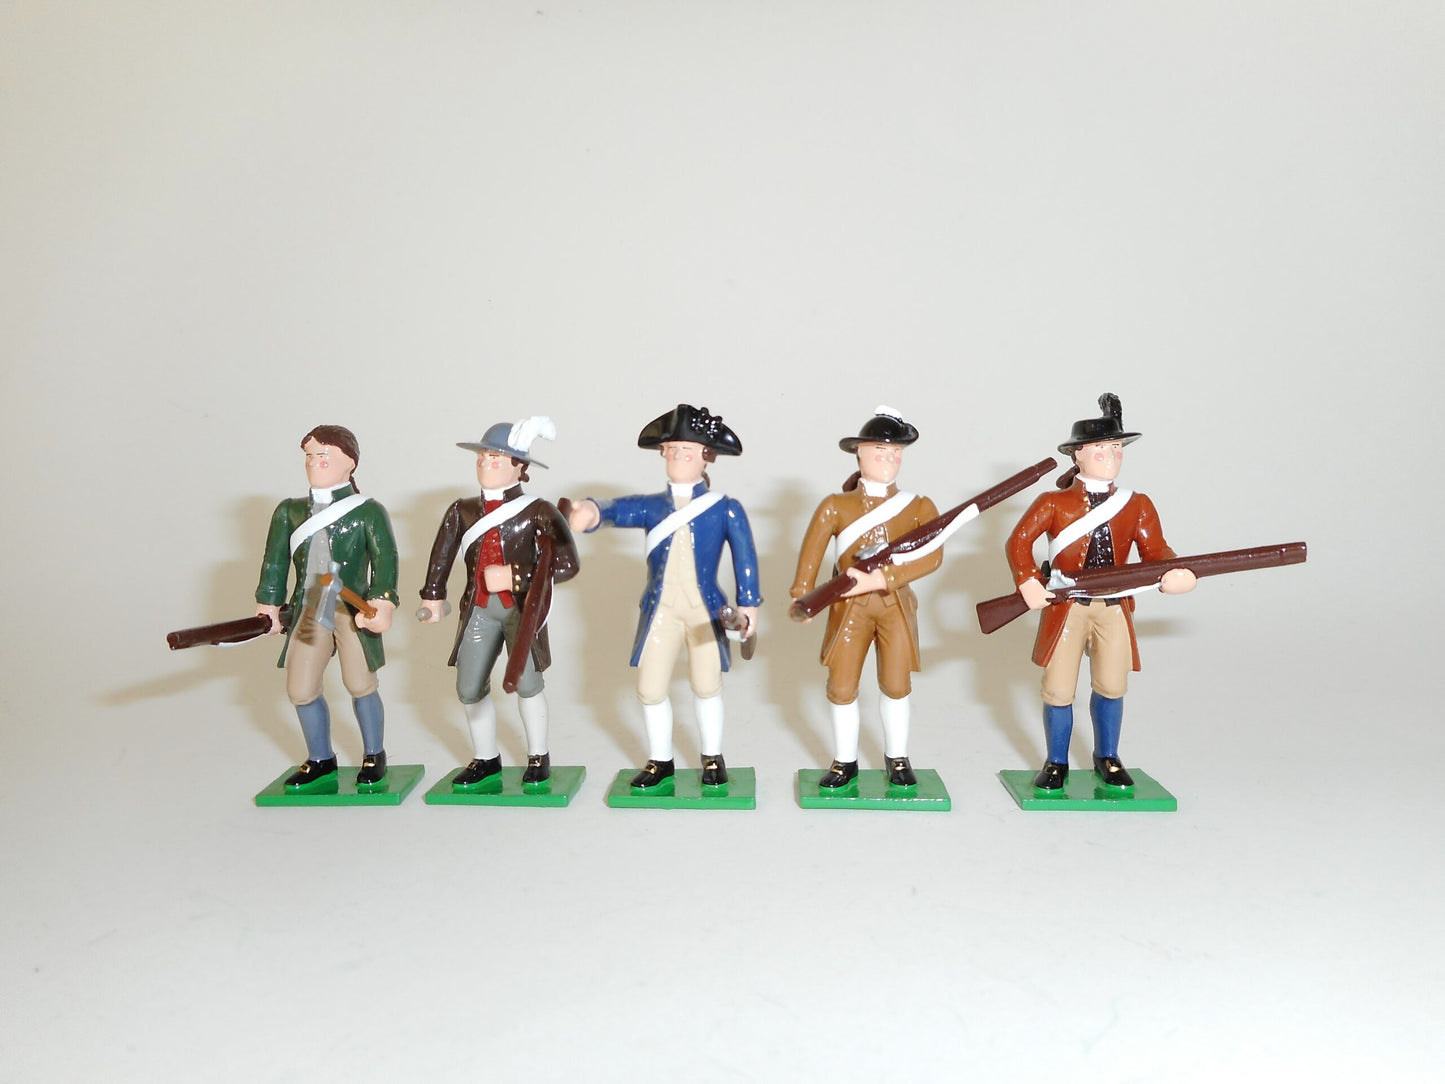 Collectible toy soldier miniature set Minute Men. Five soldiers in civilian clothing.